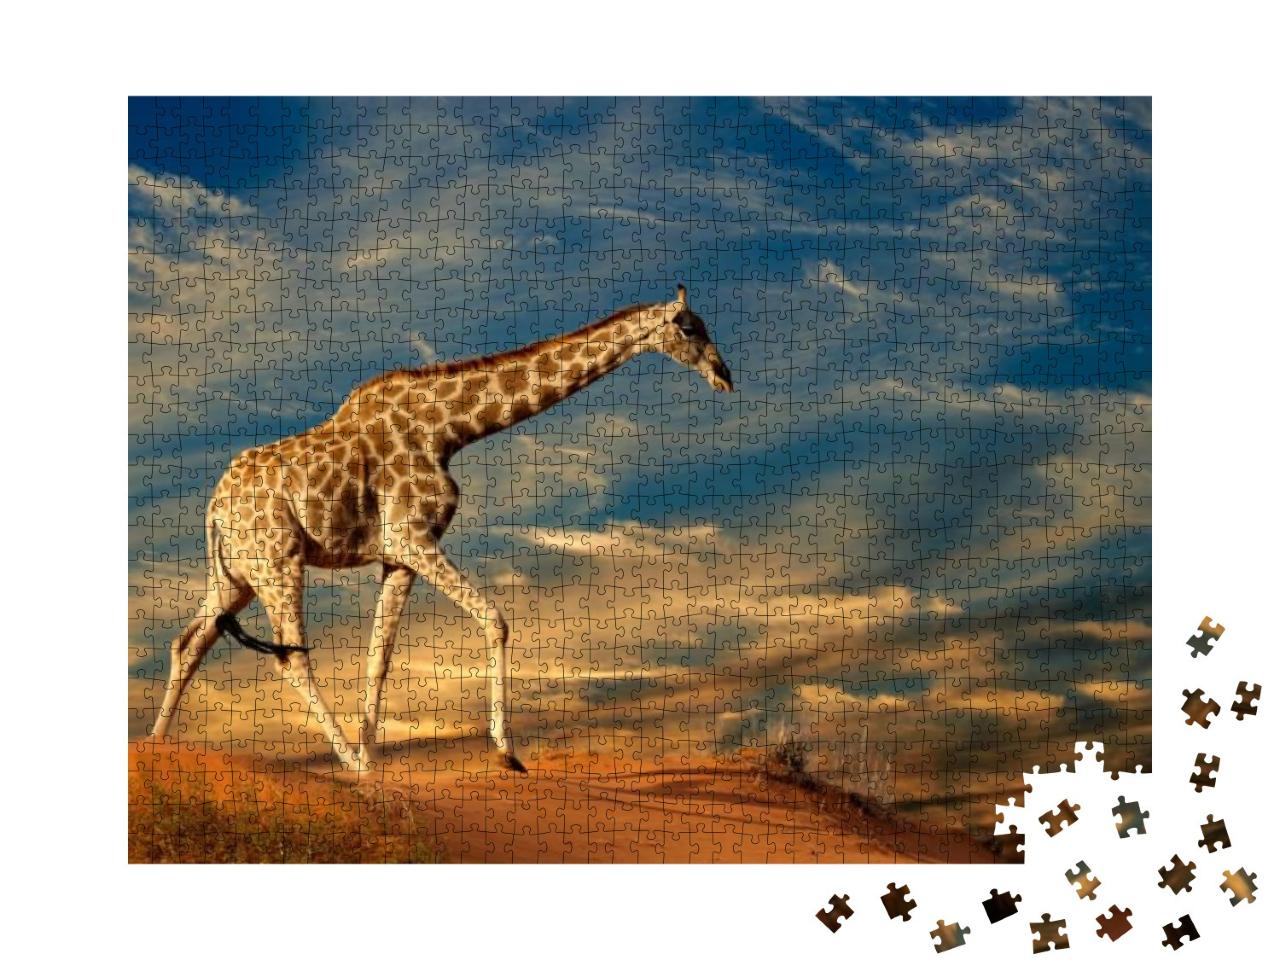 Giraffe Giraffa Camelopardalis Walking on a Sand Dune wit... Jigsaw Puzzle with 1000 pieces